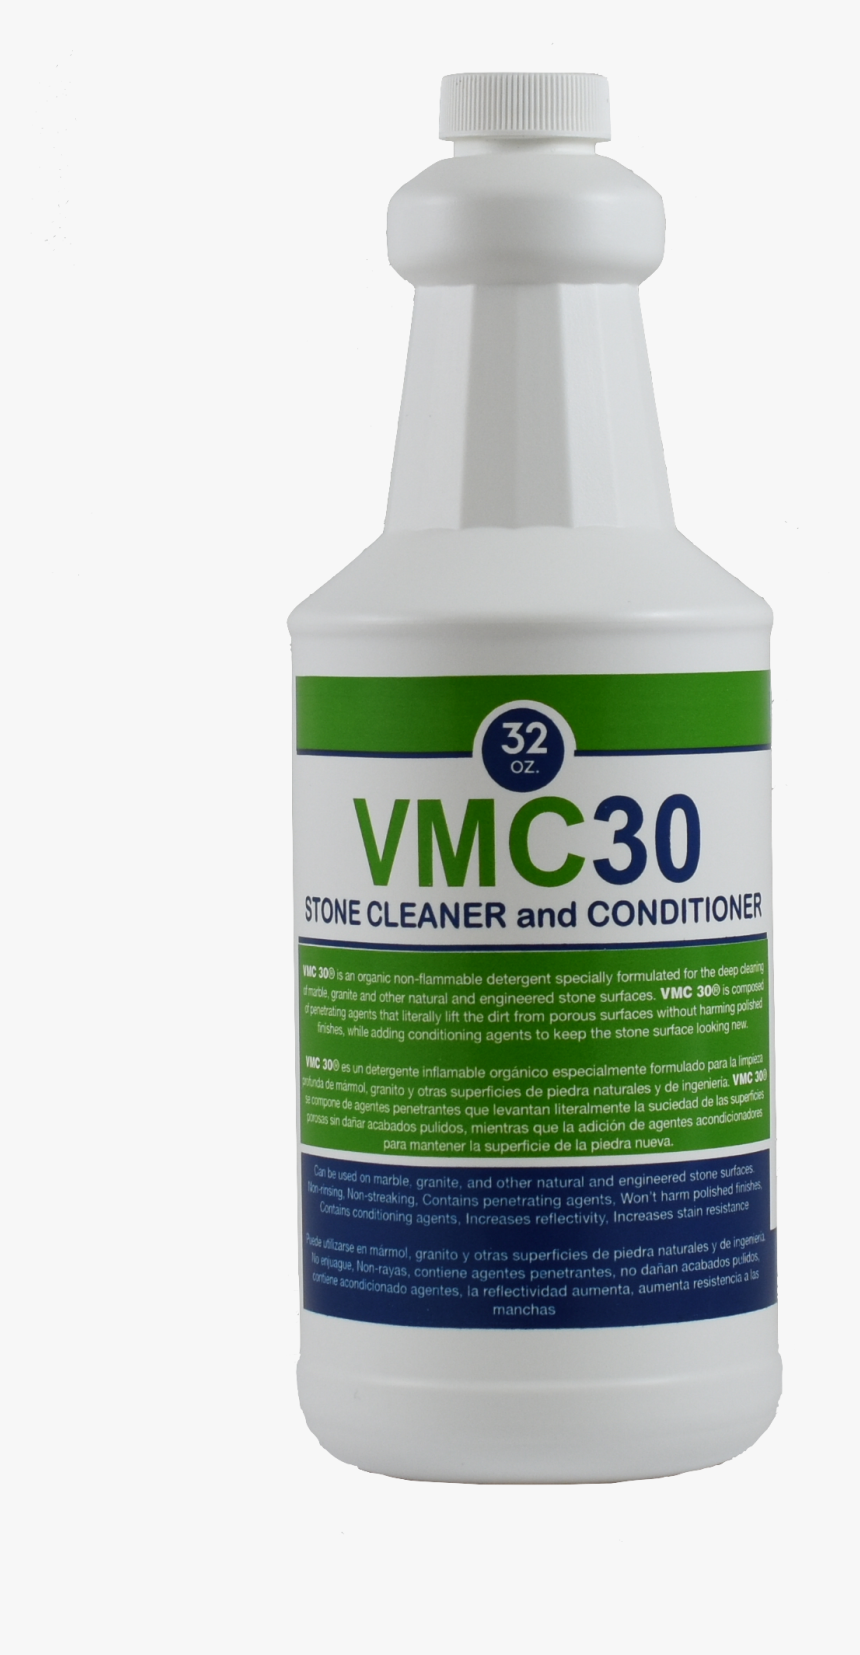 Vmc30 Stone Cleaner And Conditioner - Bottle, HD Png Download, Free Download